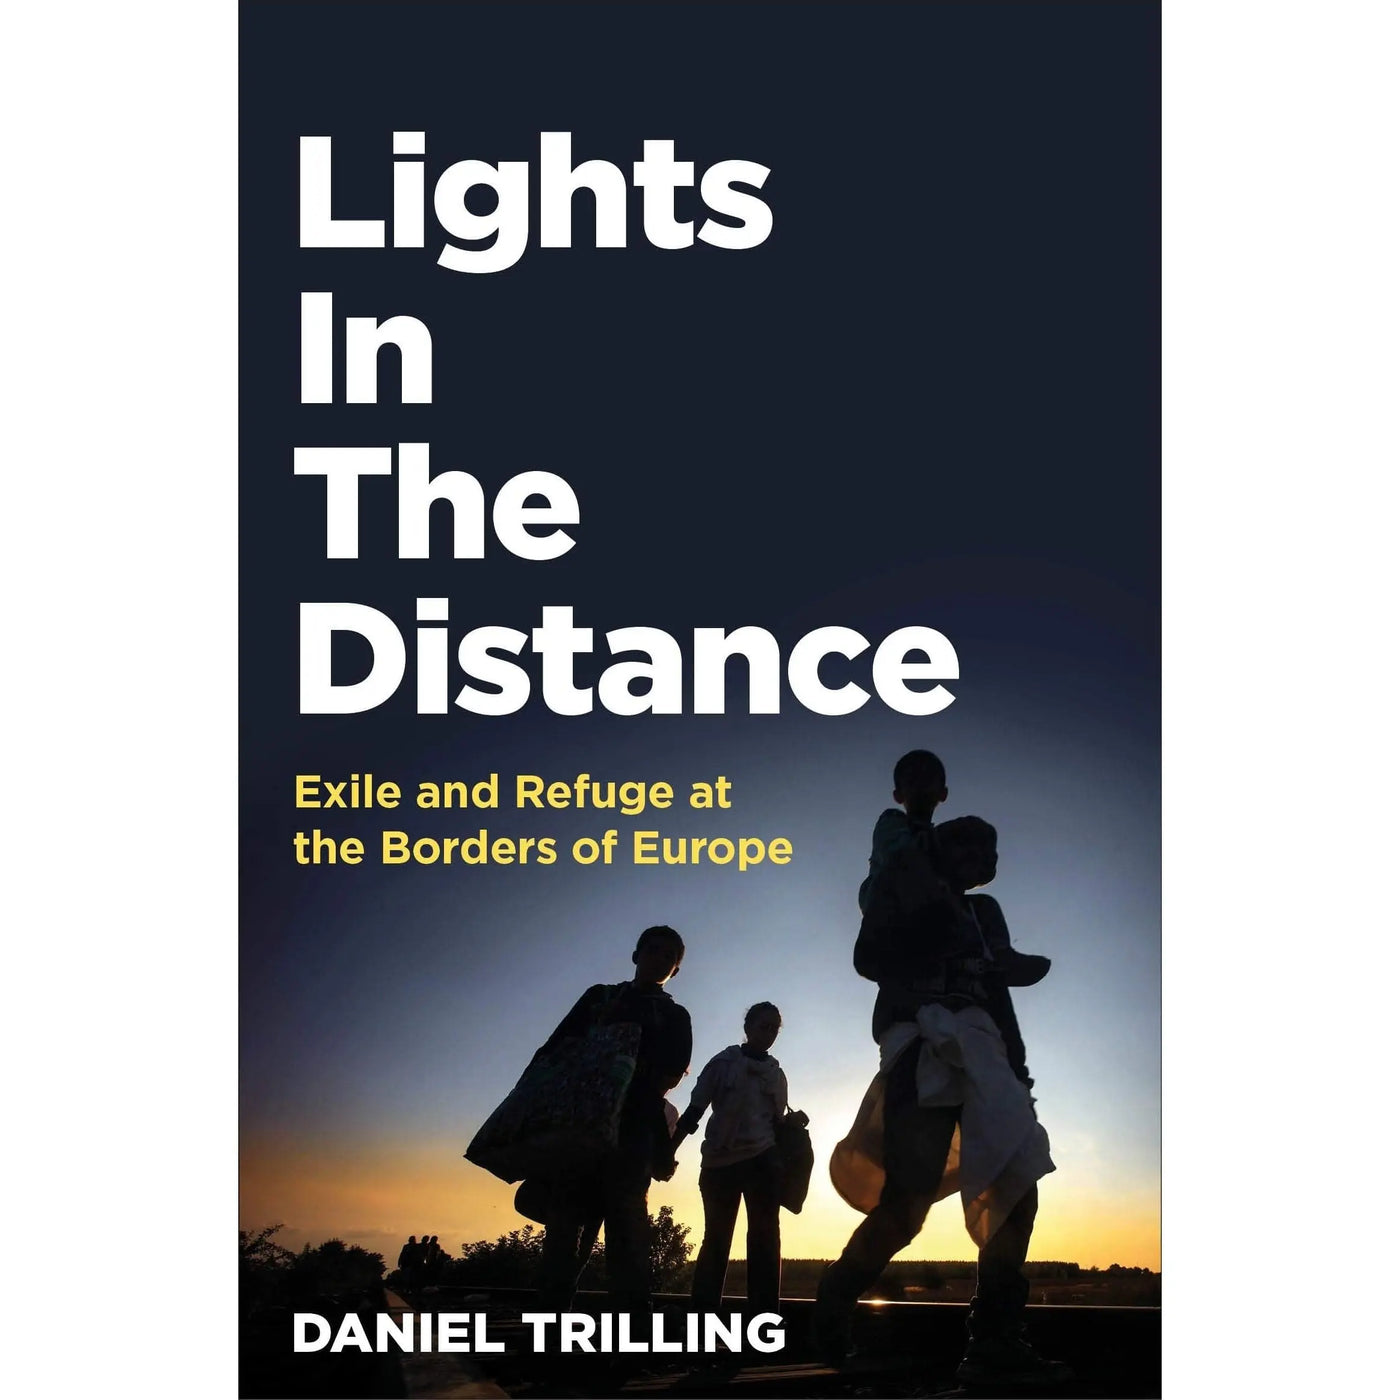 Daniel Trilling: Lights in the Distance Exile and Refuge at the Borders of Europe - Migration Museum Shop